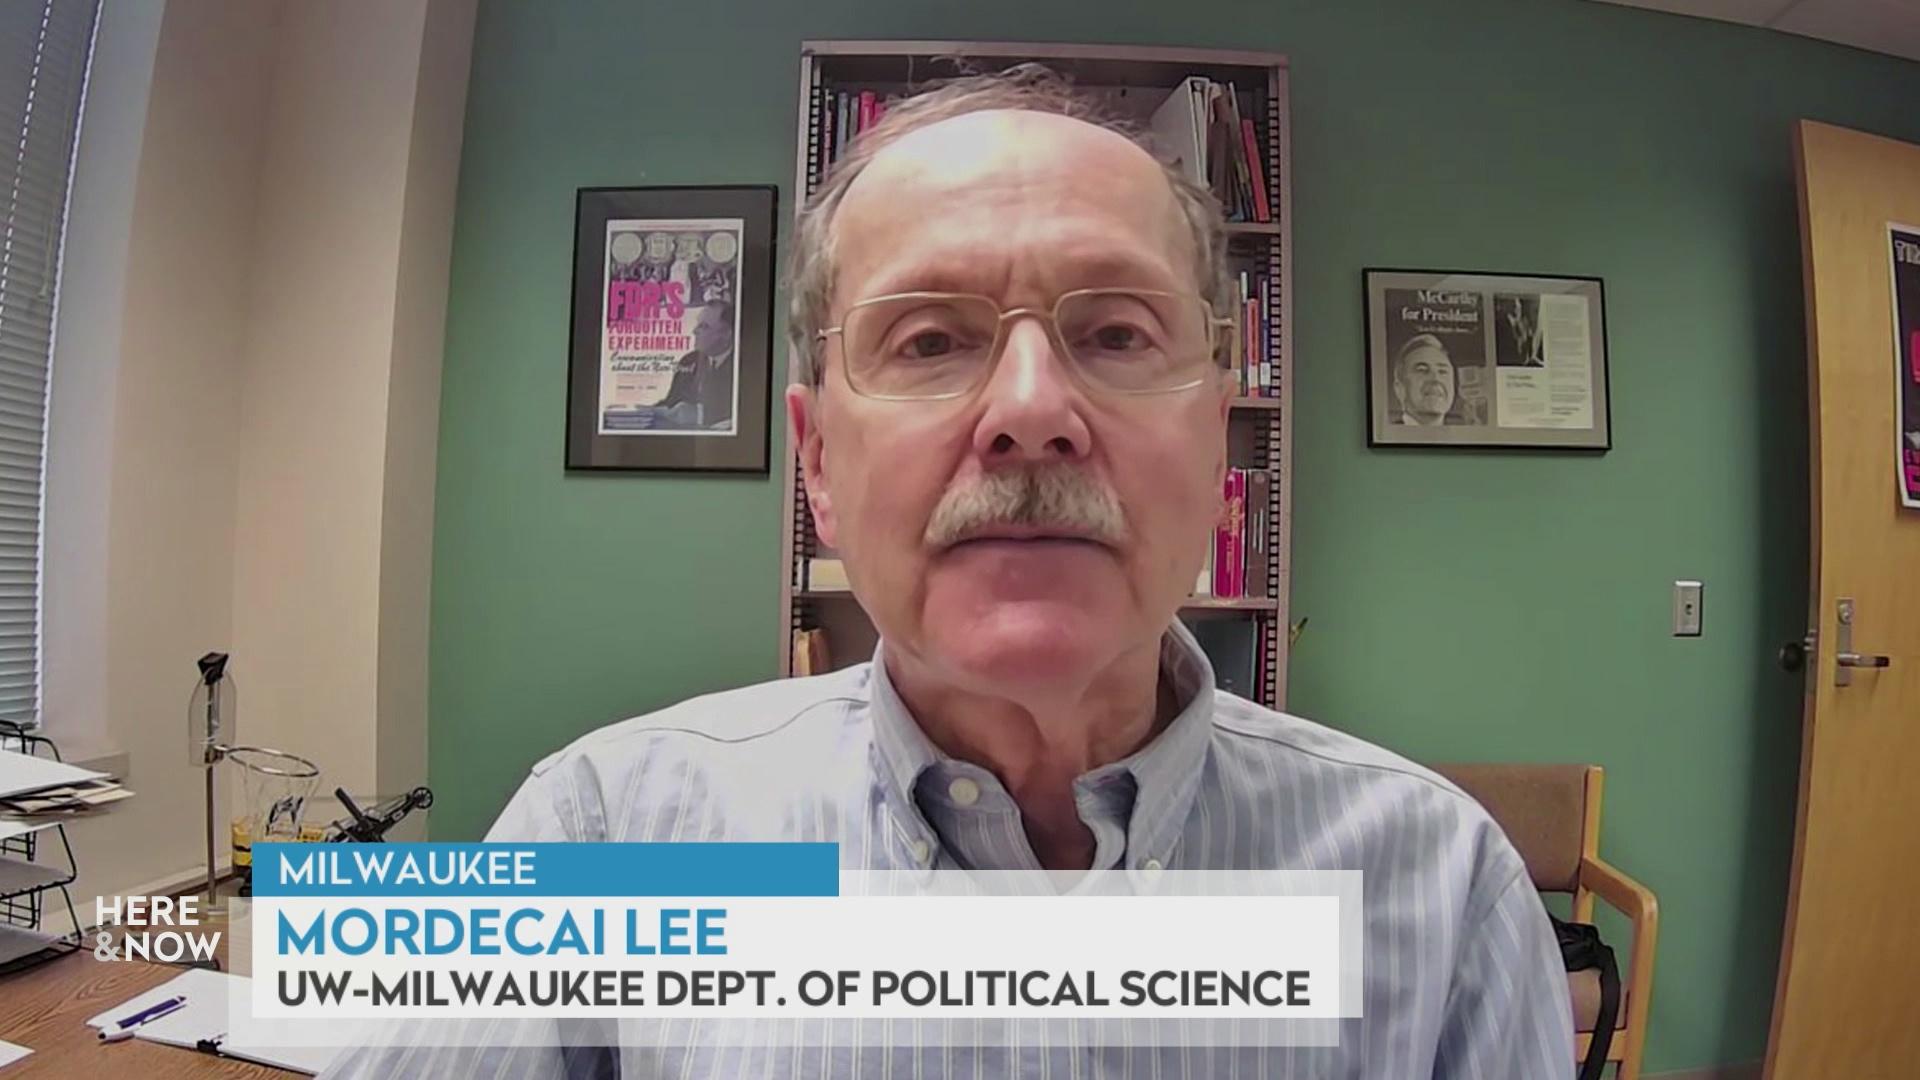 A still image from a video shows Mordecai Lee seated in front of a wall with framed art hanging on the wall on either side with a graphic at bottom reading 'Milwaukee,' 'Mordecai Lee' and 'UW-Milwaukee Dept. of Political Science.'